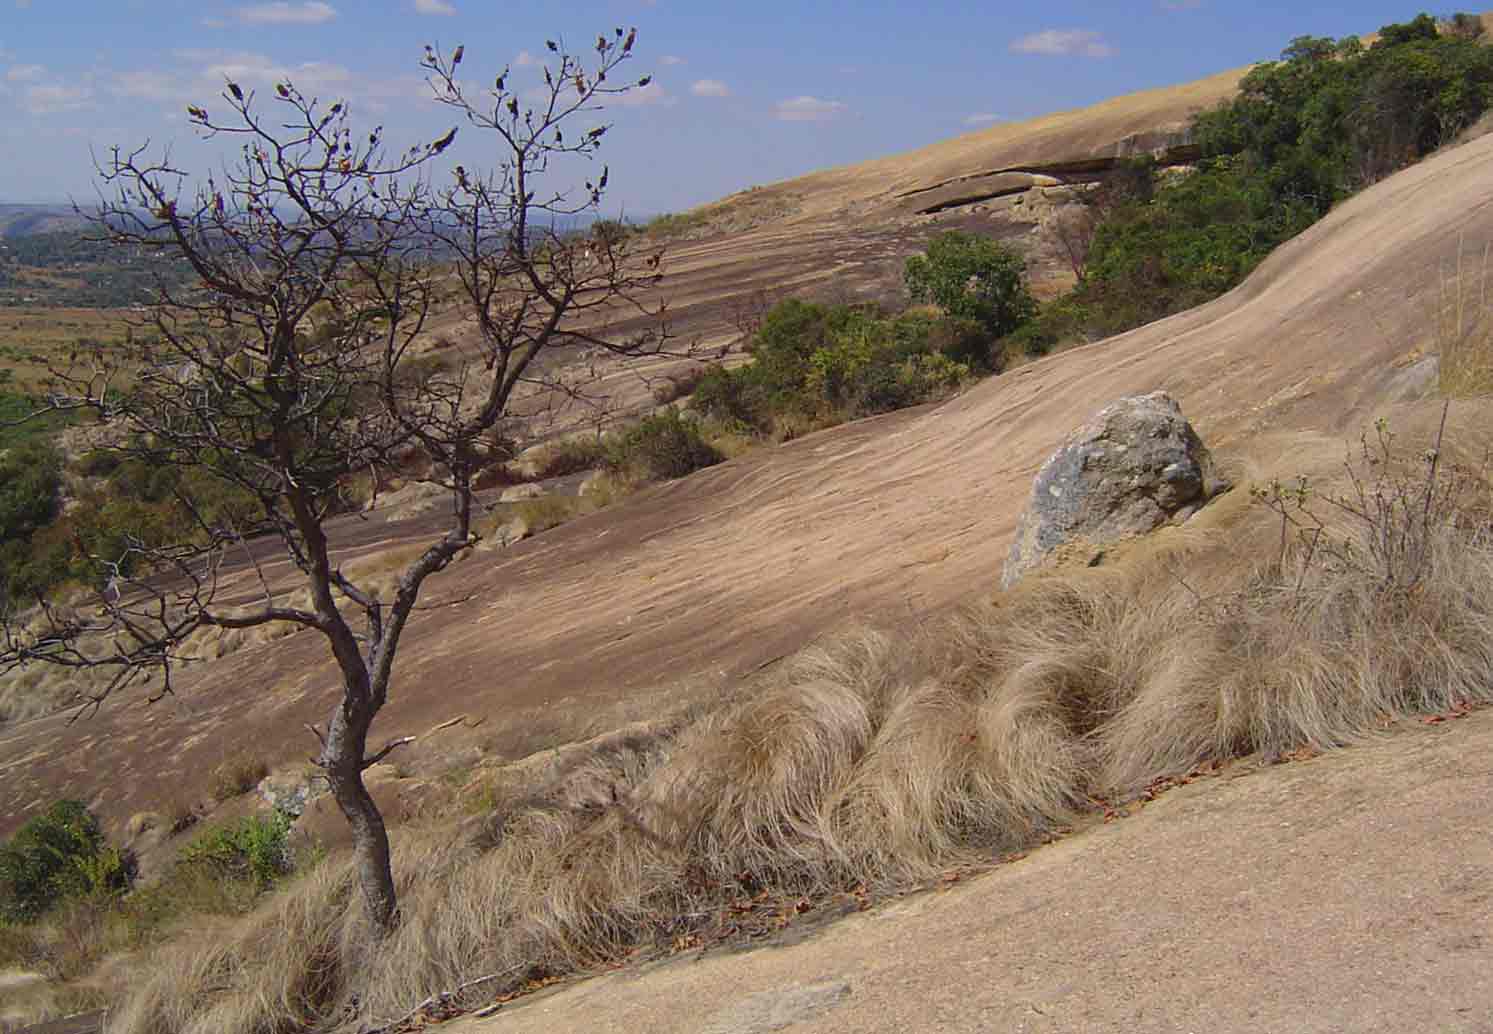 View from a distance towards Domboshawa Cave. A leafless specimen of <a href="species.php?species_id=155120">Hymenodictyon floribundum</a> is visible in the foreground.